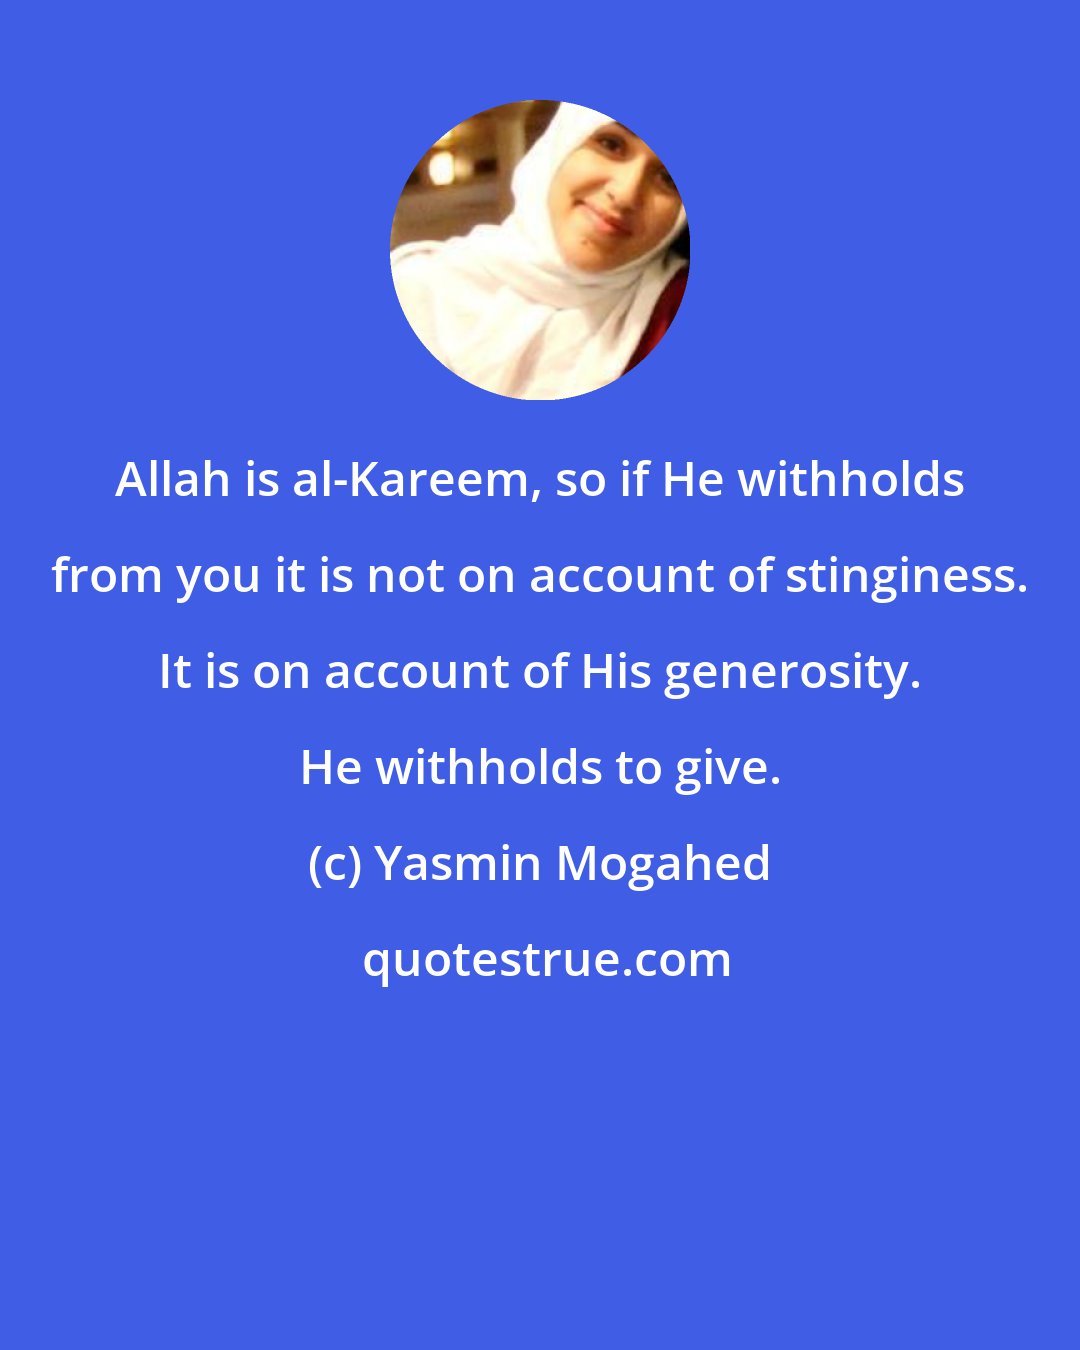 Yasmin Mogahed: Allah is al-Kareem, so if He withholds from you it is not on account of stinginess. It is on account of His generosity. He withholds to give.